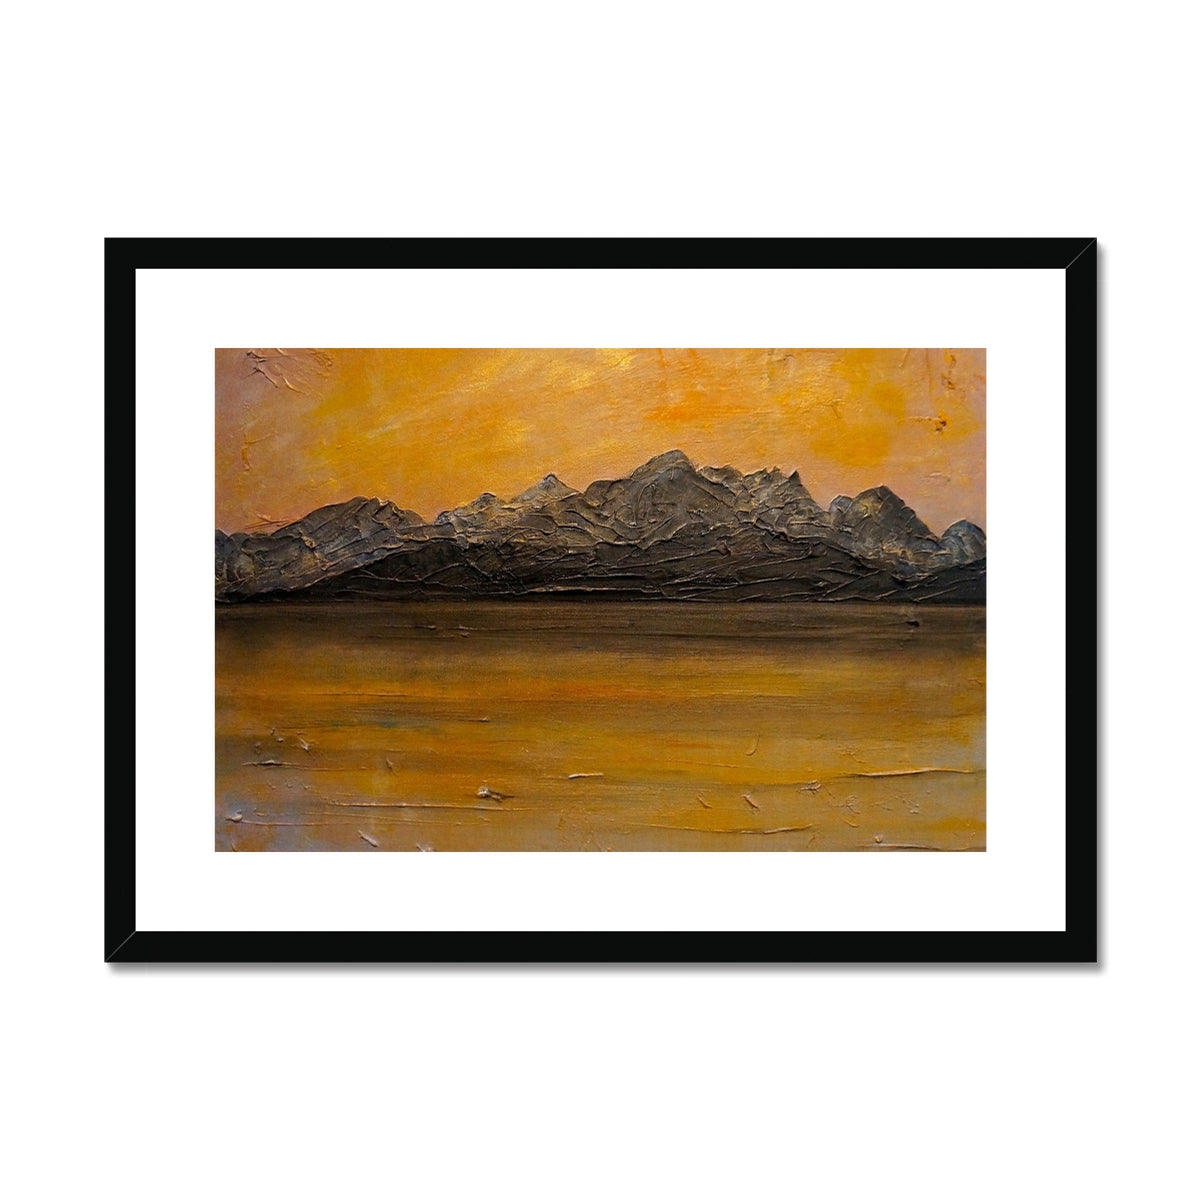 Cuillin Sunset Skye Painting | Framed & Mounted Prints From Scotland-Framed & Mounted Prints-Skye Art Gallery-A2 Landscape-Black Frame-Paintings, Prints, Homeware, Art Gifts From Scotland By Scottish Artist Kevin Hunter